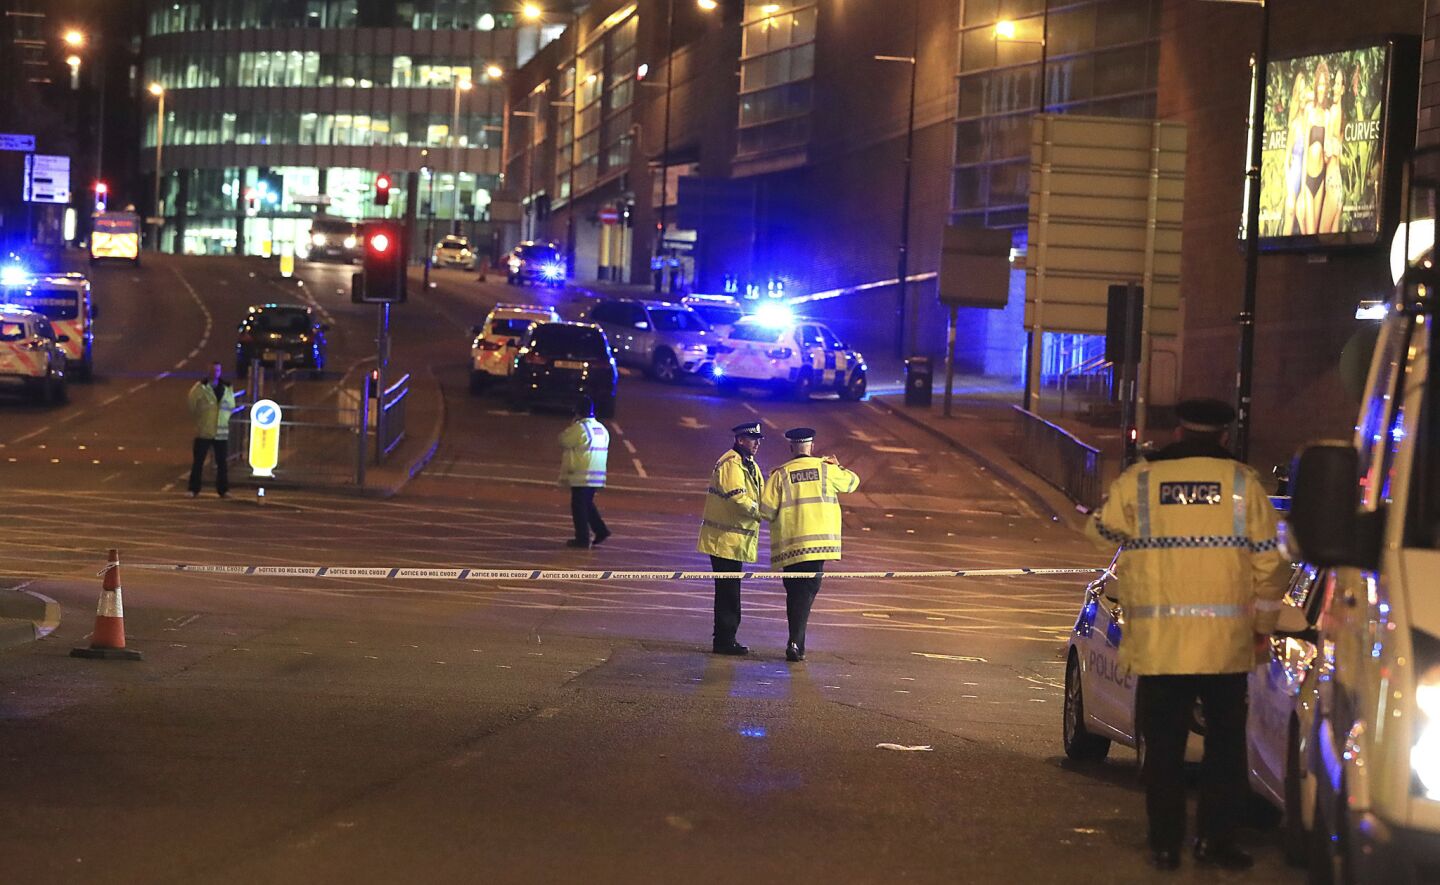 Emergency services work at Manchester Arena after reports of an explosion during an Ariana Grande concert.